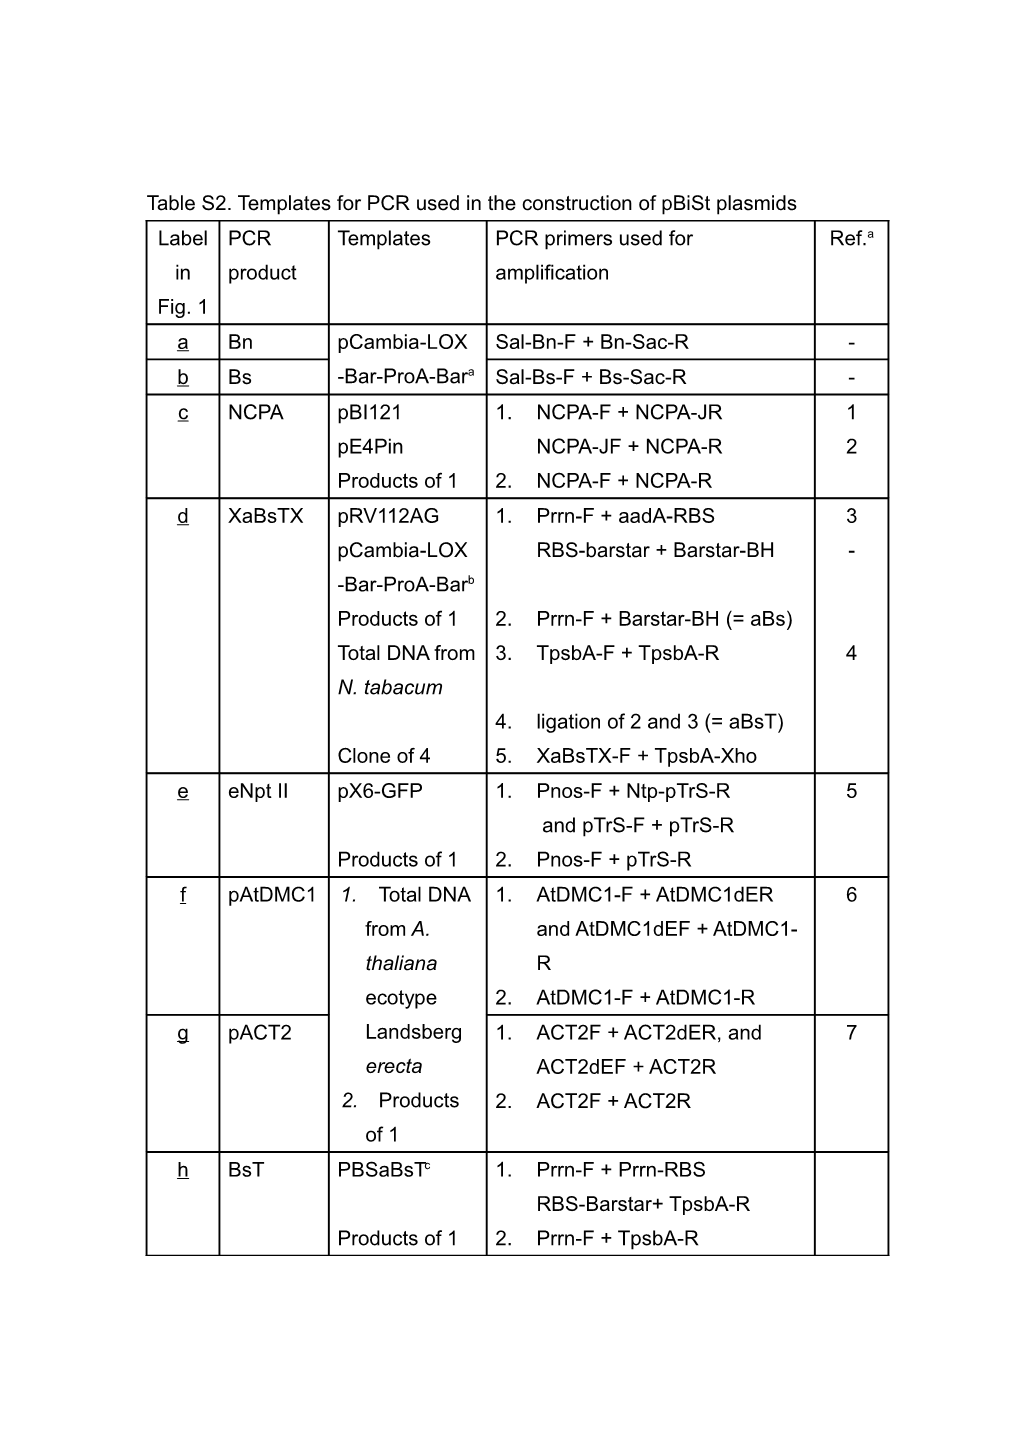 Table S2. Templates for PCR Used in the Construction of Pbist Plasmids